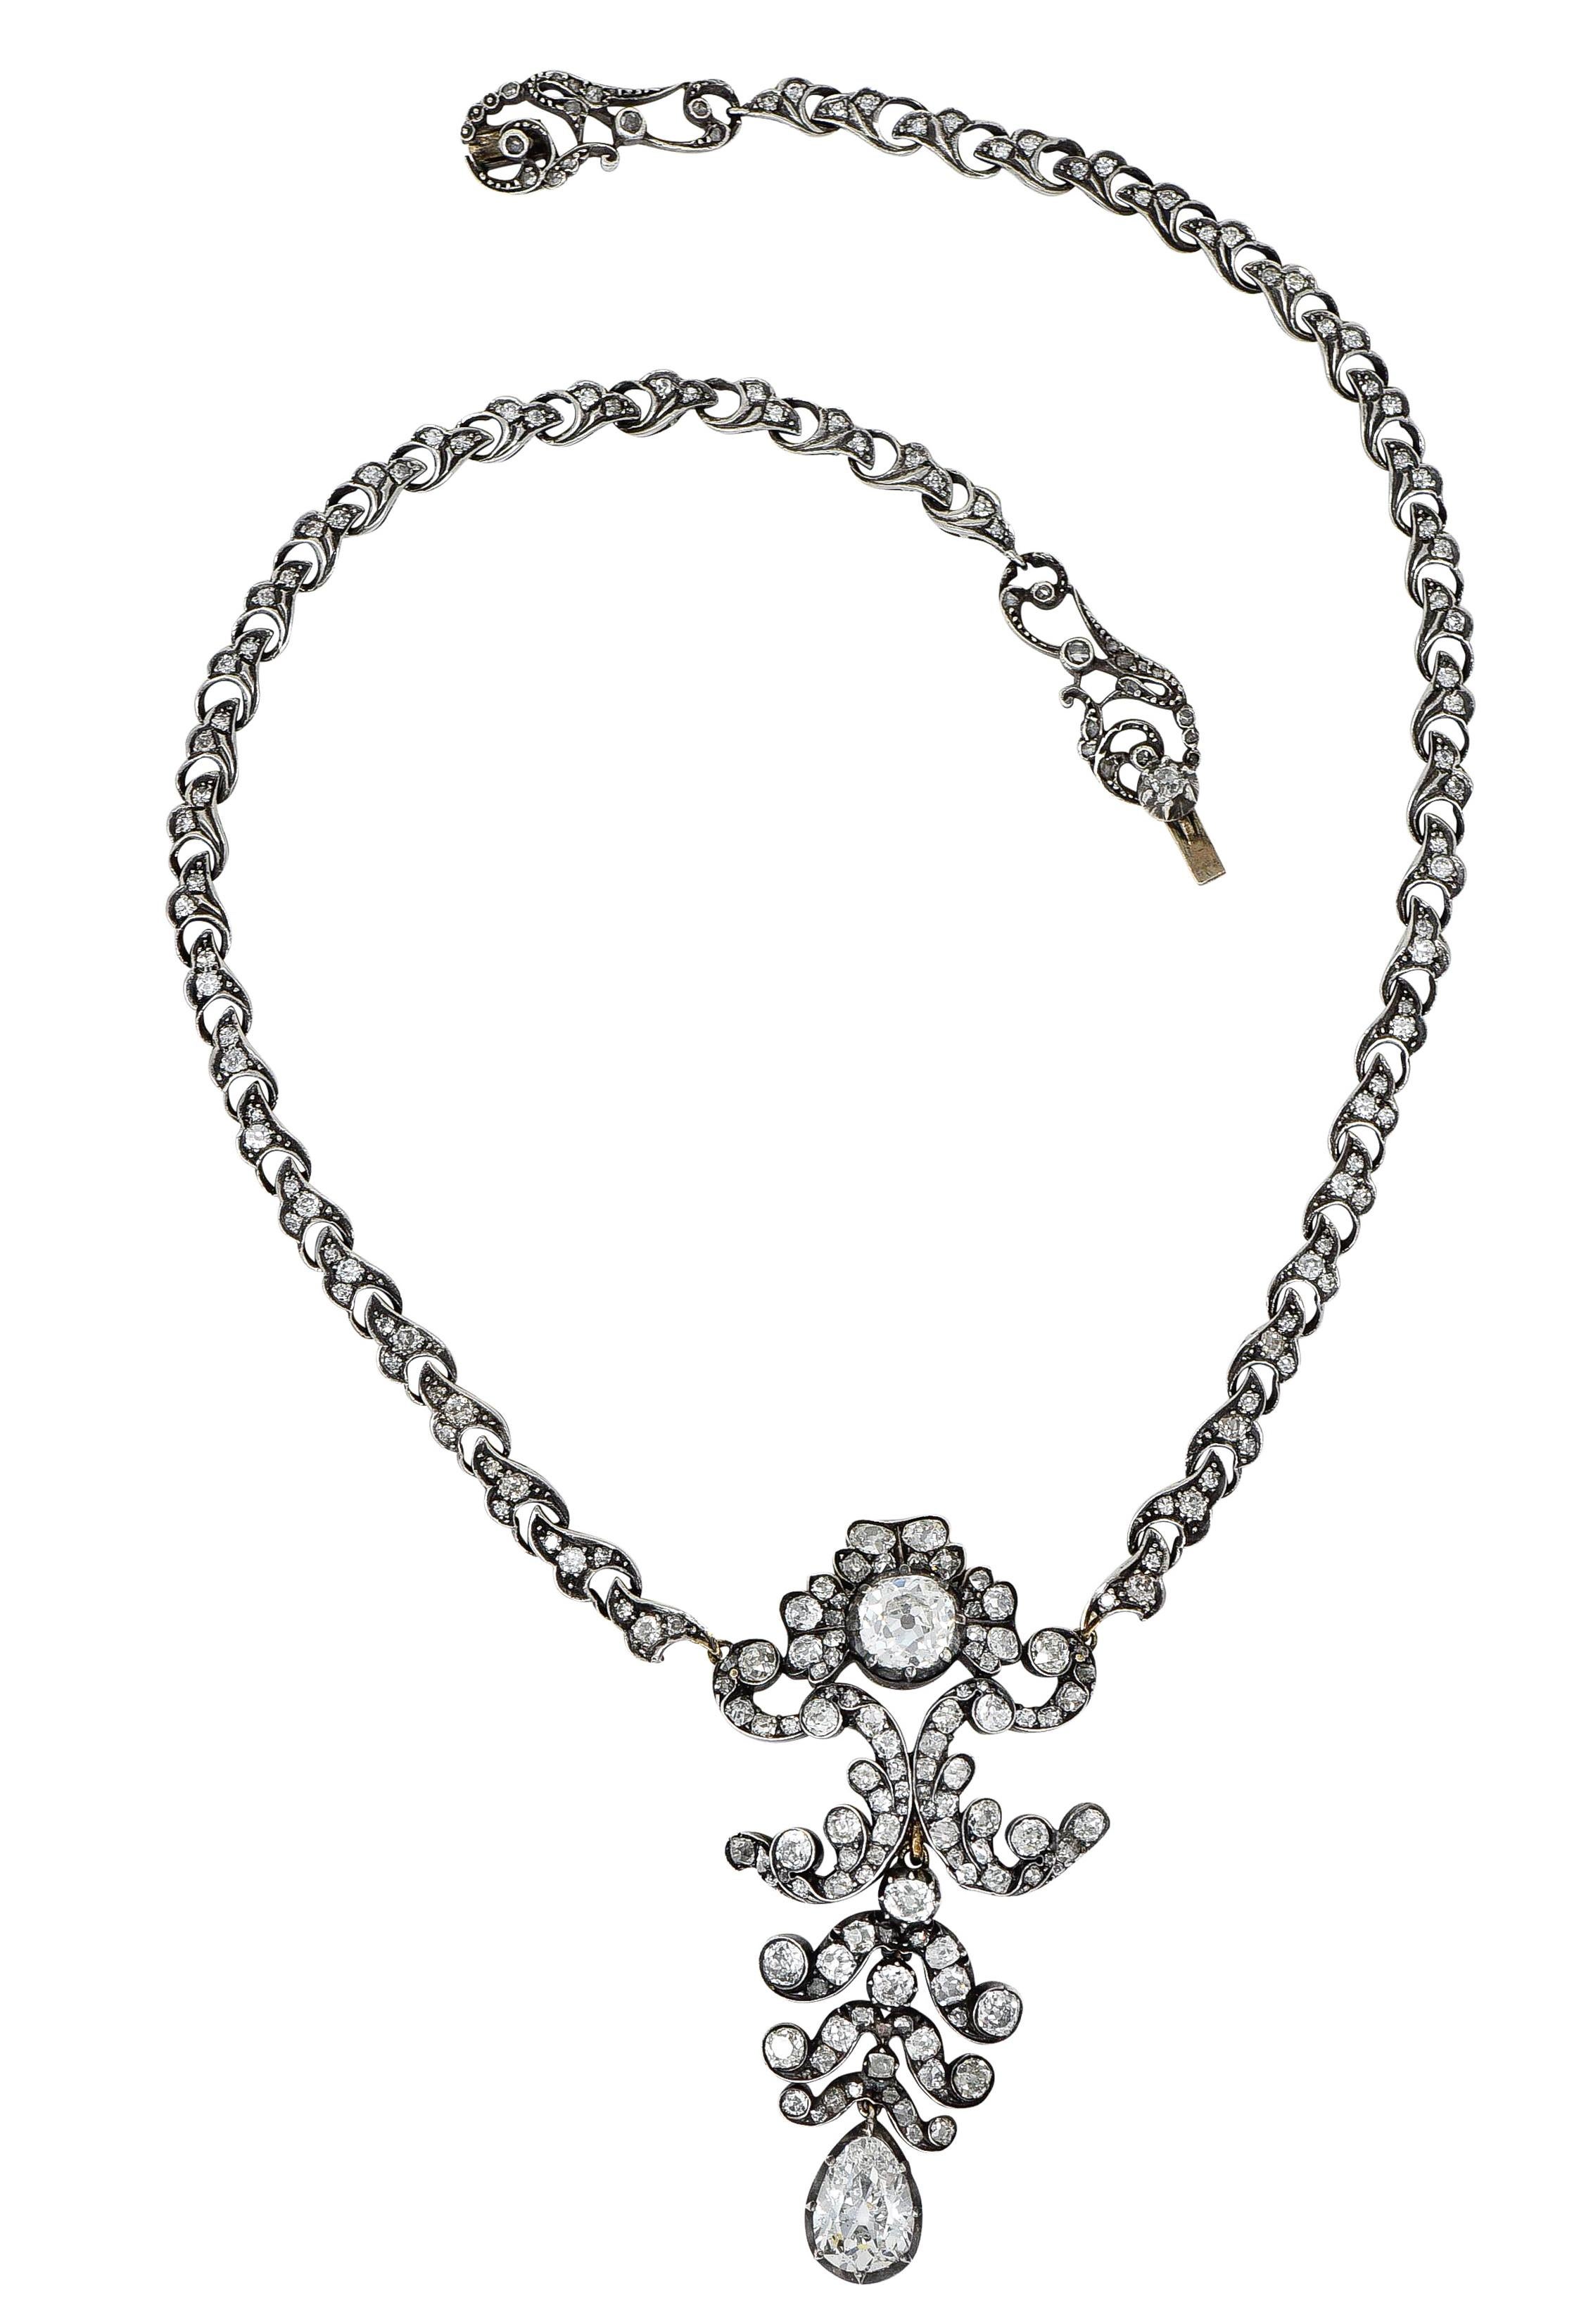 Necklace is comprised of stylized ginkgo leaves that center an ornate floral station

Featuring a large old mine cut diamond weighing 1.73 carats - I color with SI1 clarity

And suspends an articulated drop featuring a pear cut diamond weighing 2.38